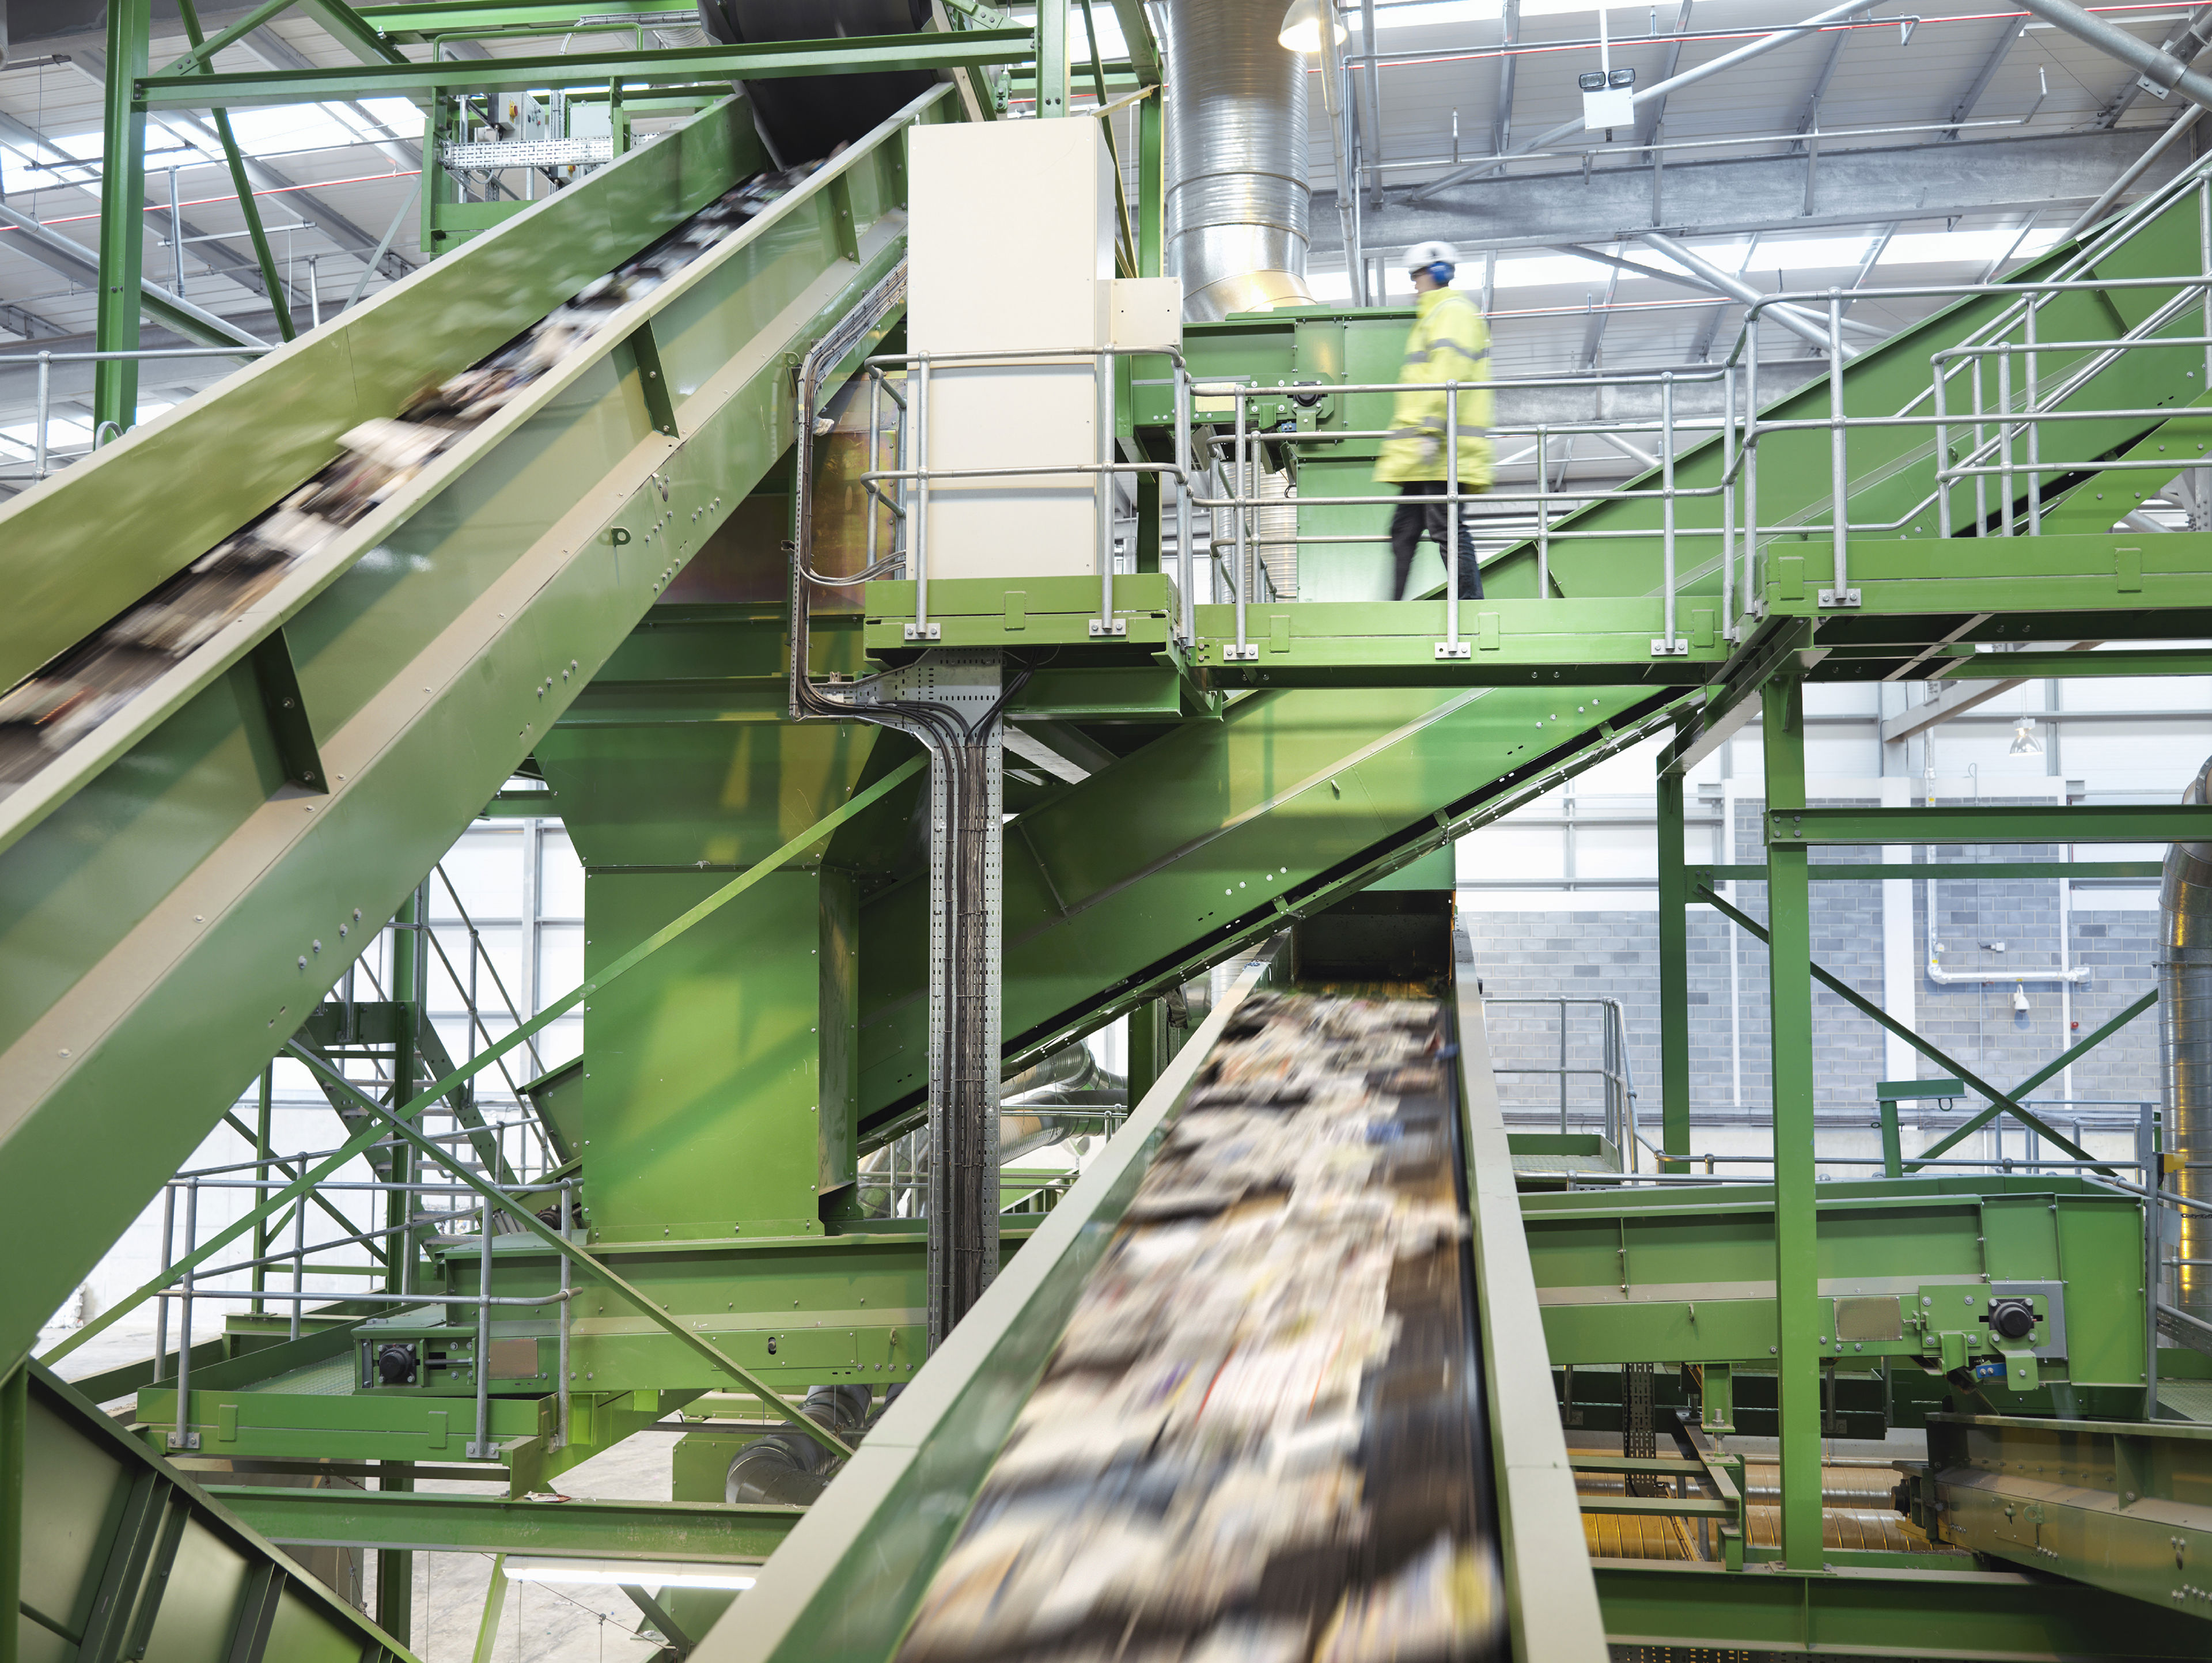 Worker Checking Conveyor Belts With Waste Paper In Waste Recycling Plant